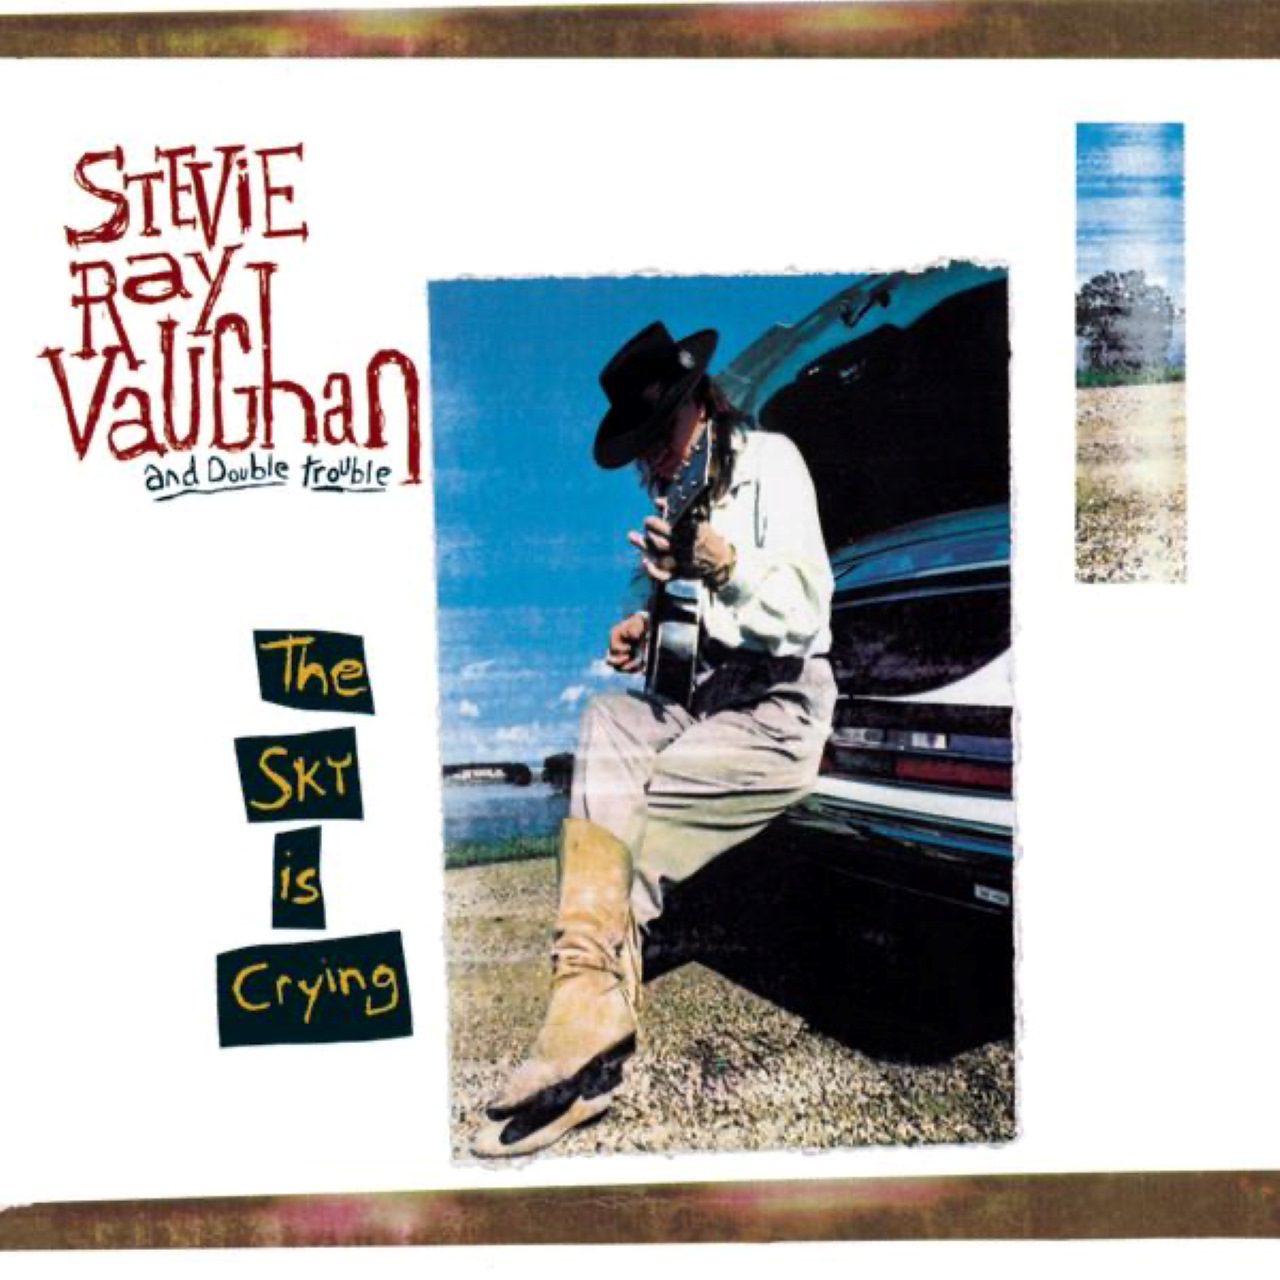 Stevie Ray Vaughan – The Sky Is Crying cover album